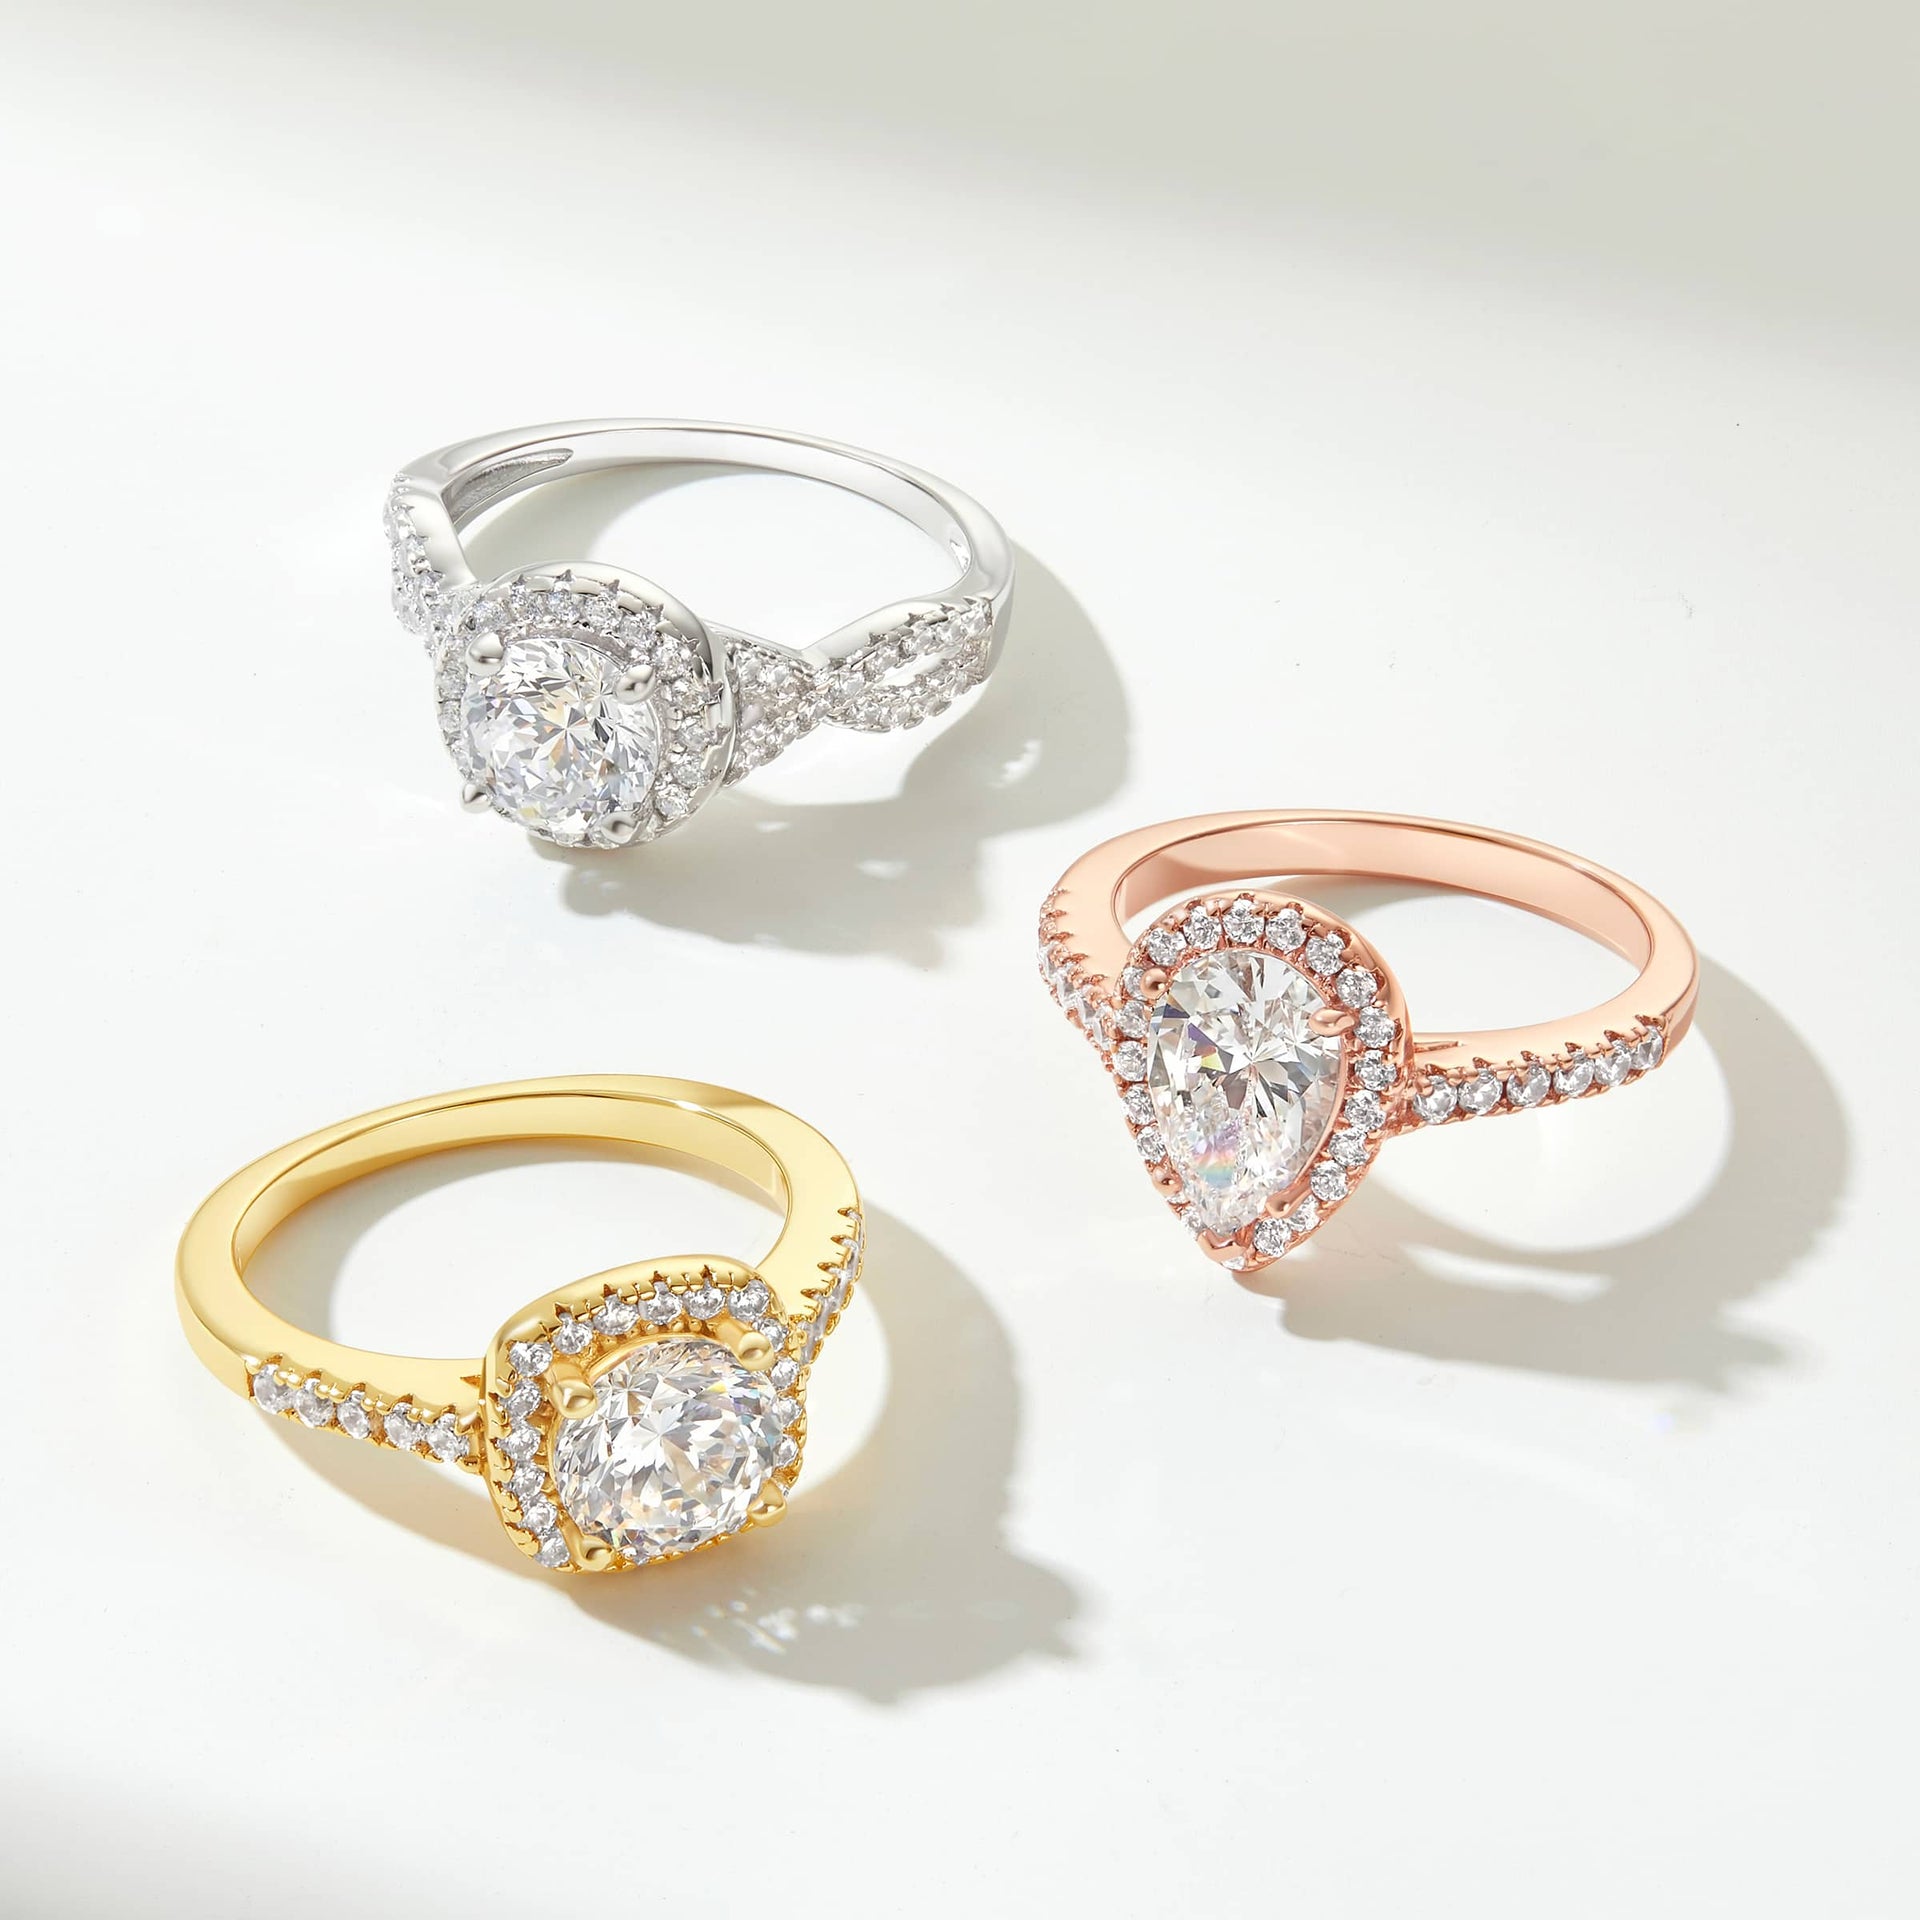 Three engagement rings in silver, gold, and rose gold placed on an off white background 